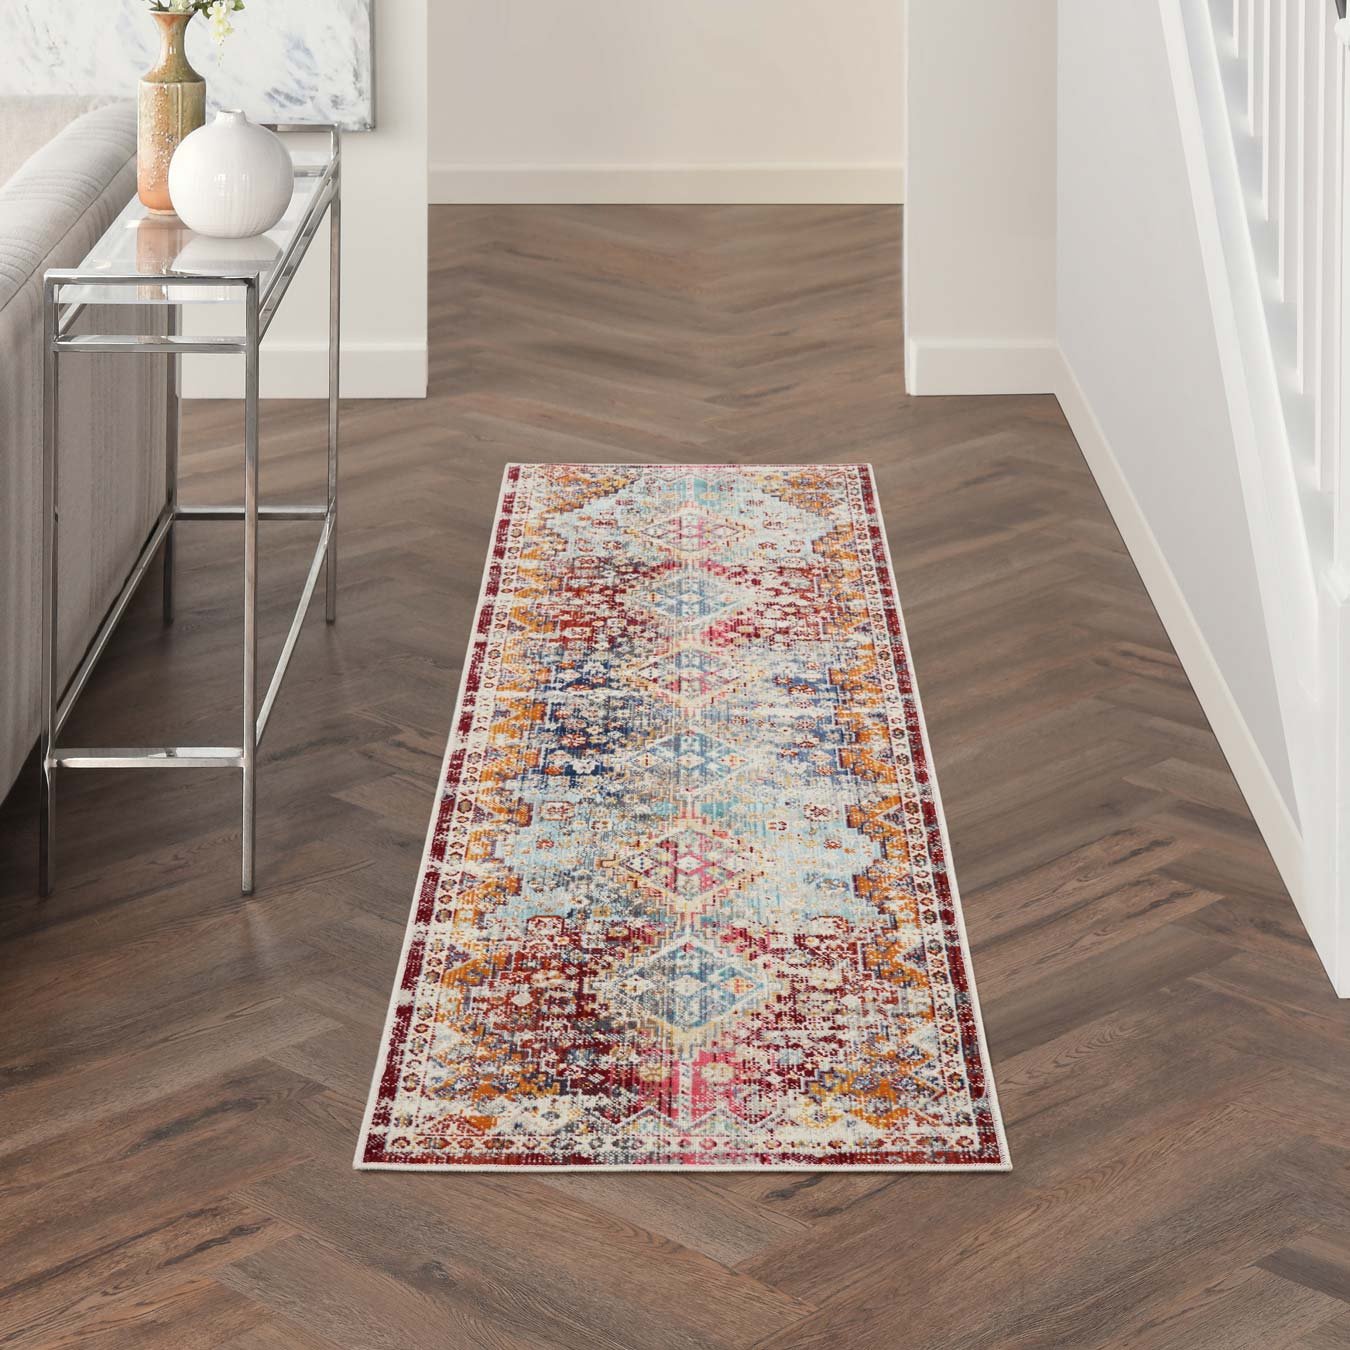 How to Keep a Carpet Runner From Moving on Carpet